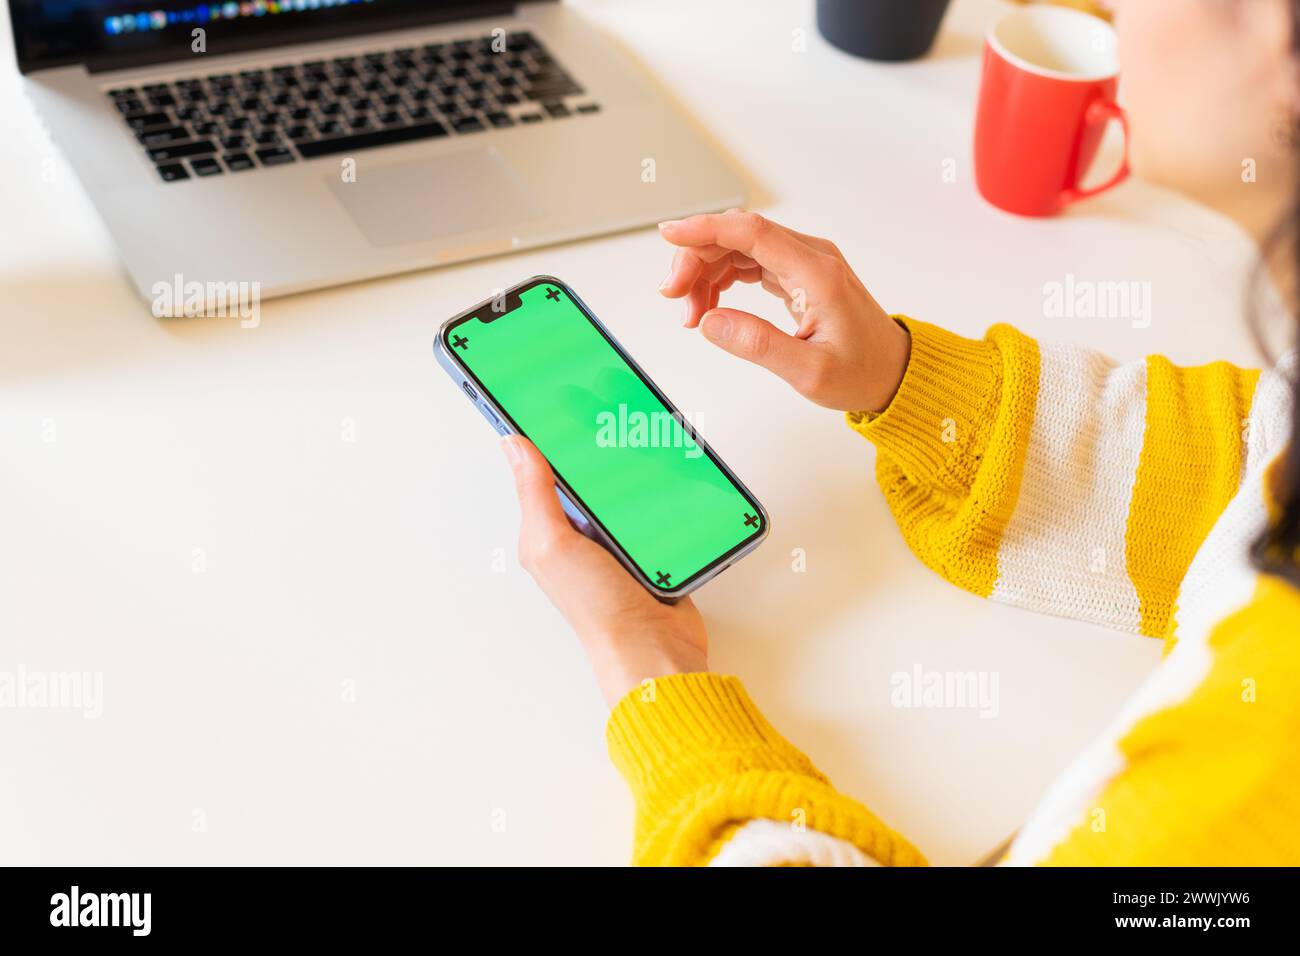 Close-up unrecognizable woman in a sweater working in using a blank modern smartphone with a green screen in chroma key display sitting table office Stock Photo